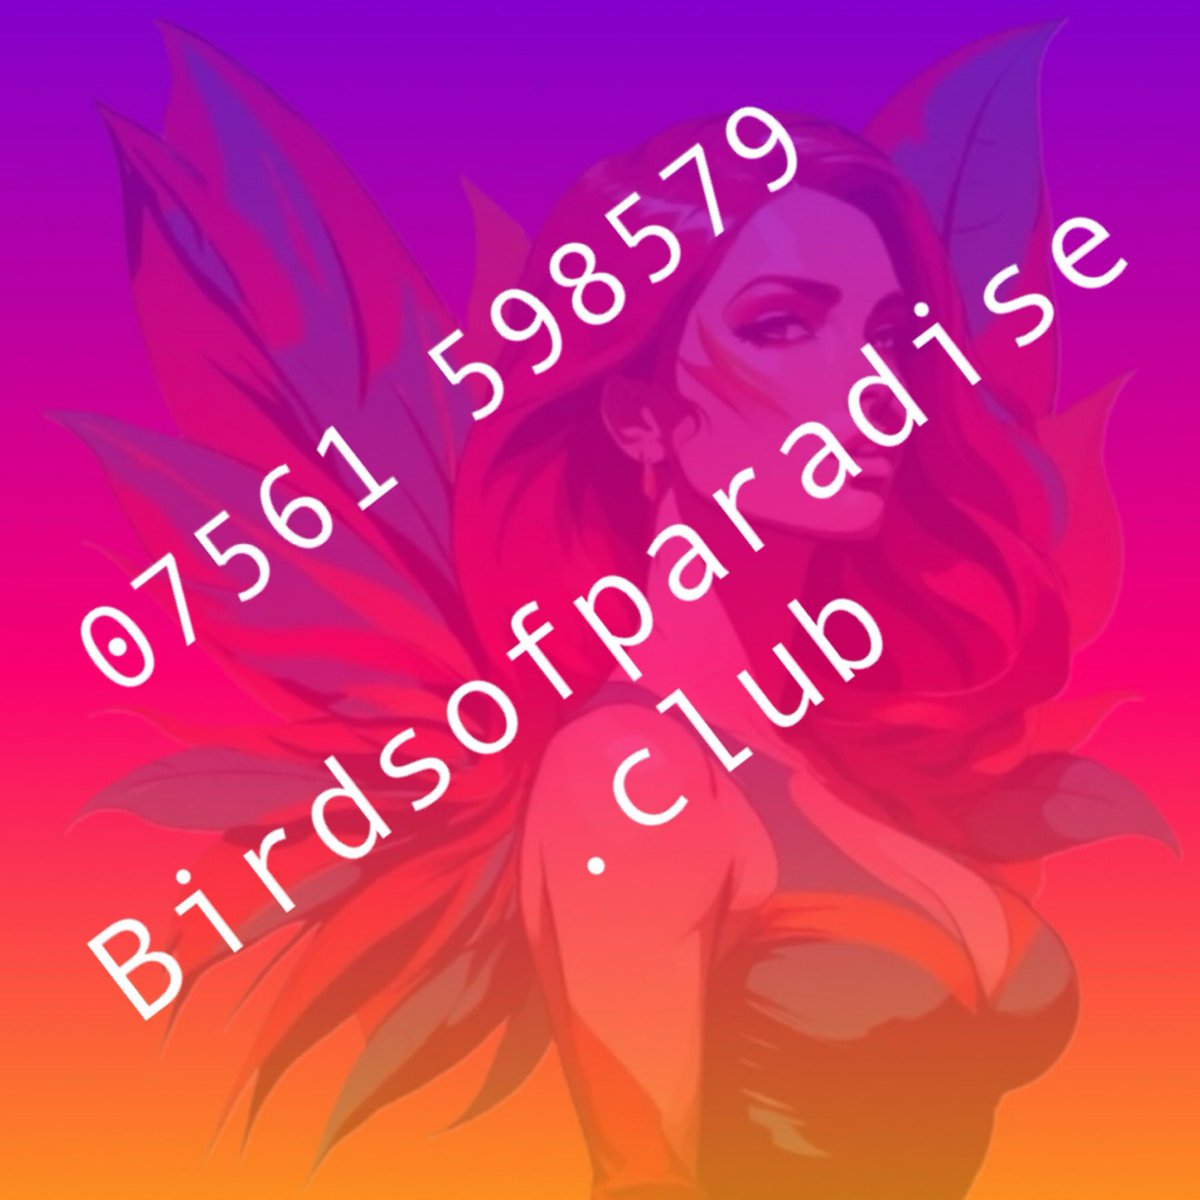 Why not join us SUNDAY 12th MAY East London 1-5pm And fulfil a fantasy with these 2 friends @goddess_gothic1 And @bambiilew Grab your place Birdsofparadise,club Info@birdsofparadise.club